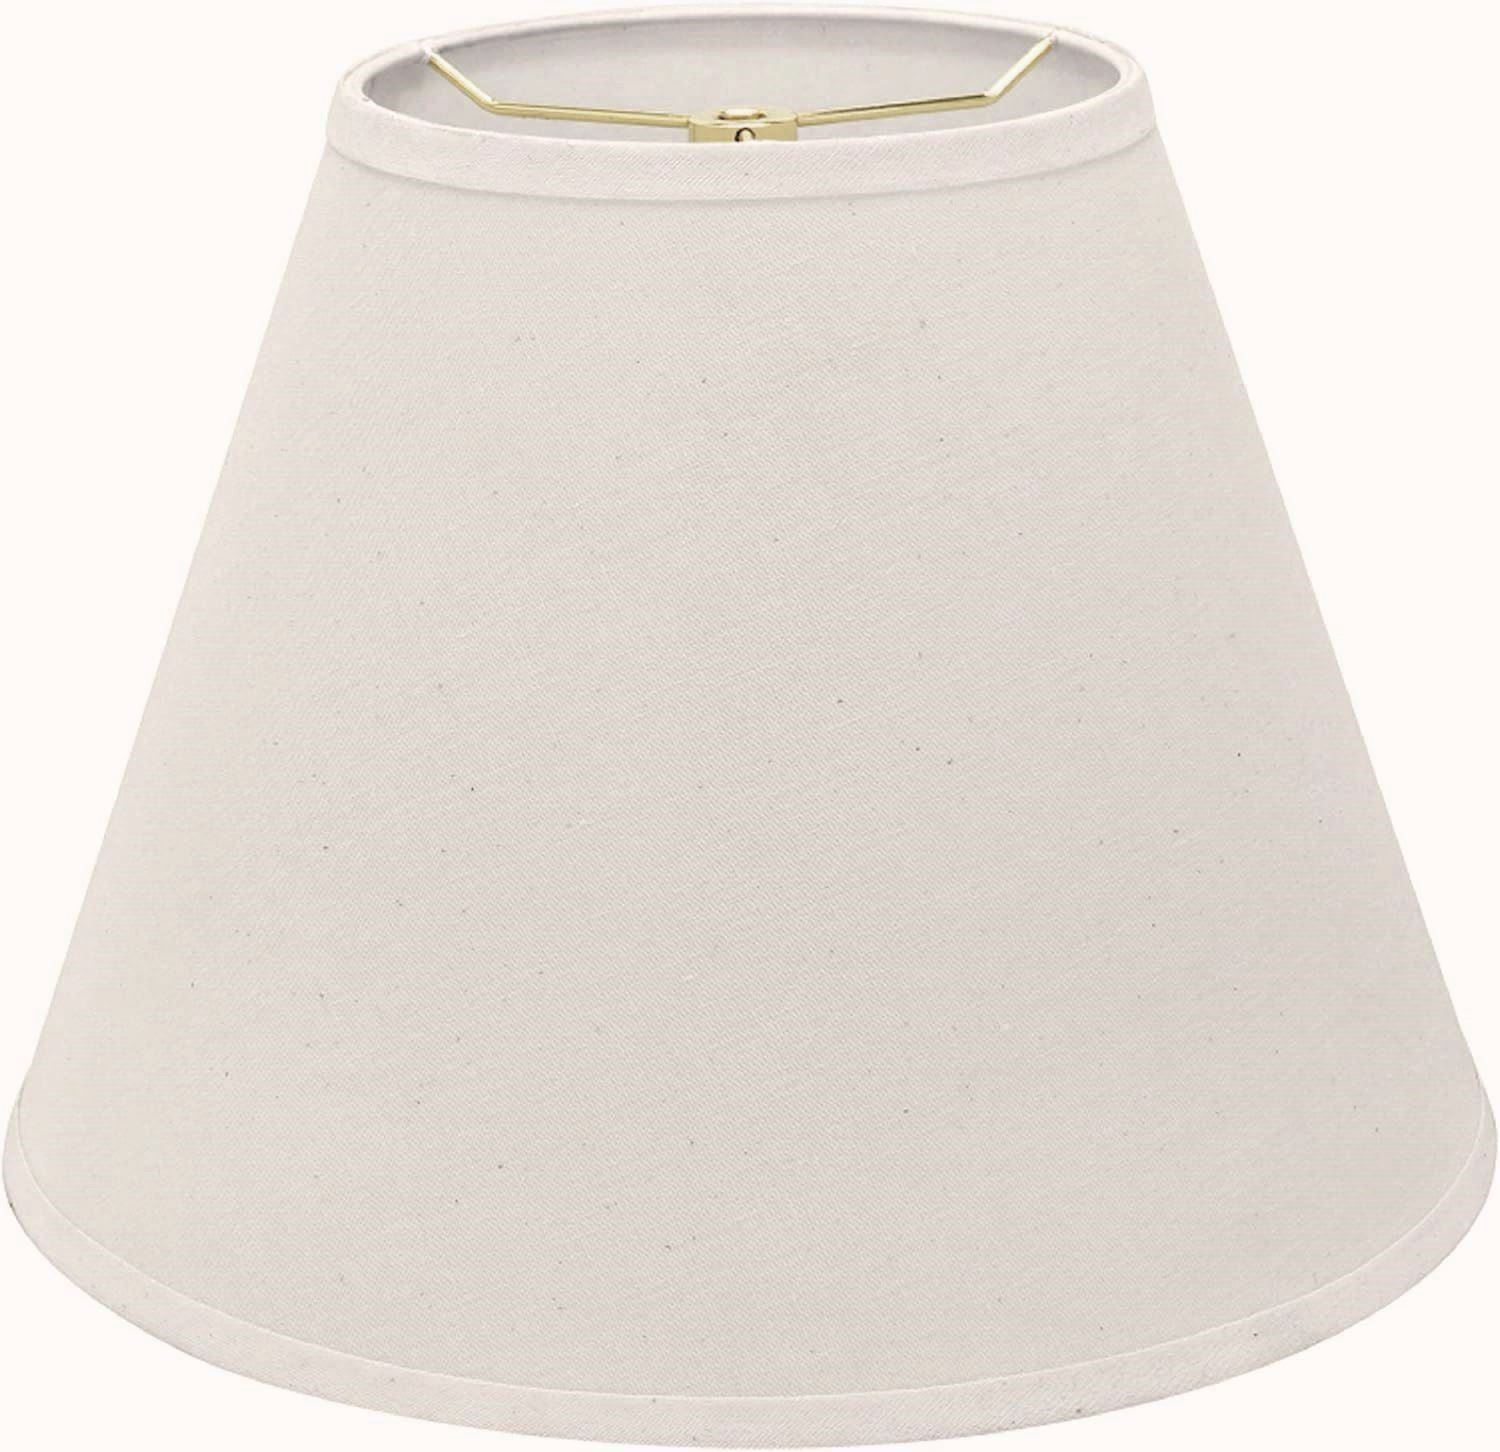 Large Linen Lamp Shade 19"W - Sale !